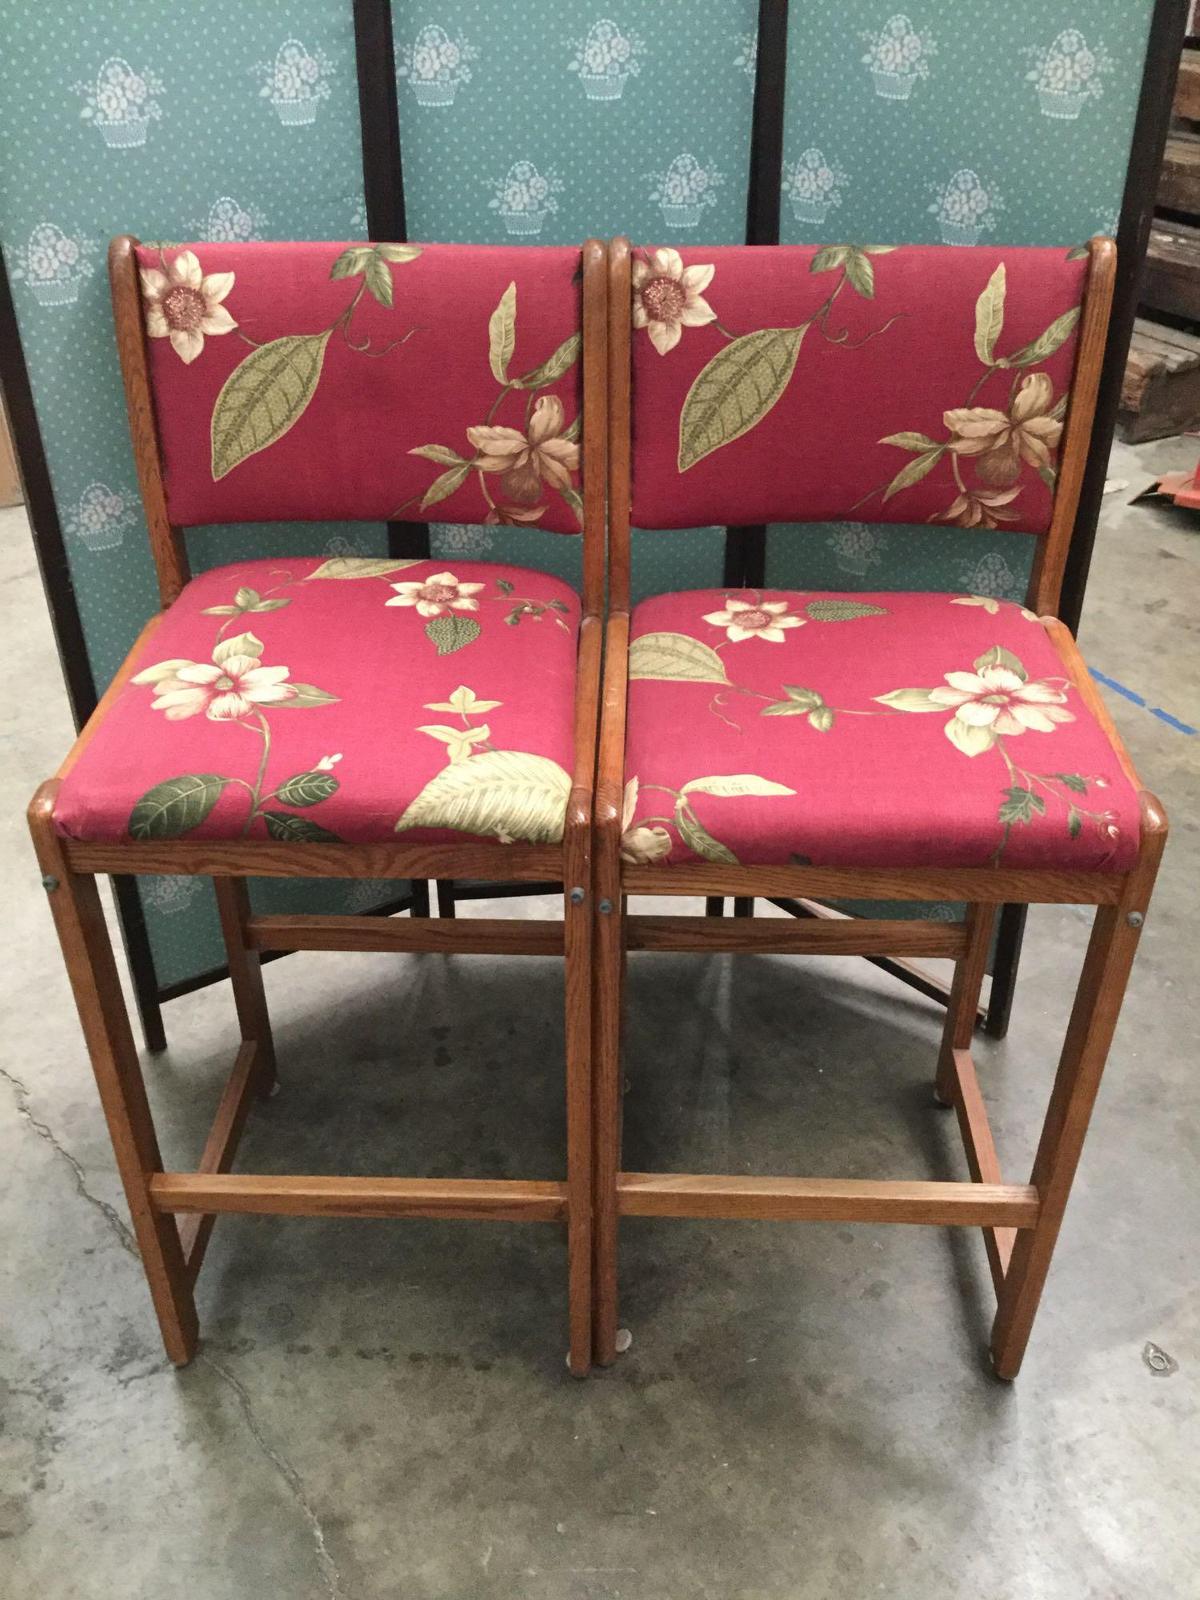 Pair of floral upholstered bar chairs - cabana vibes